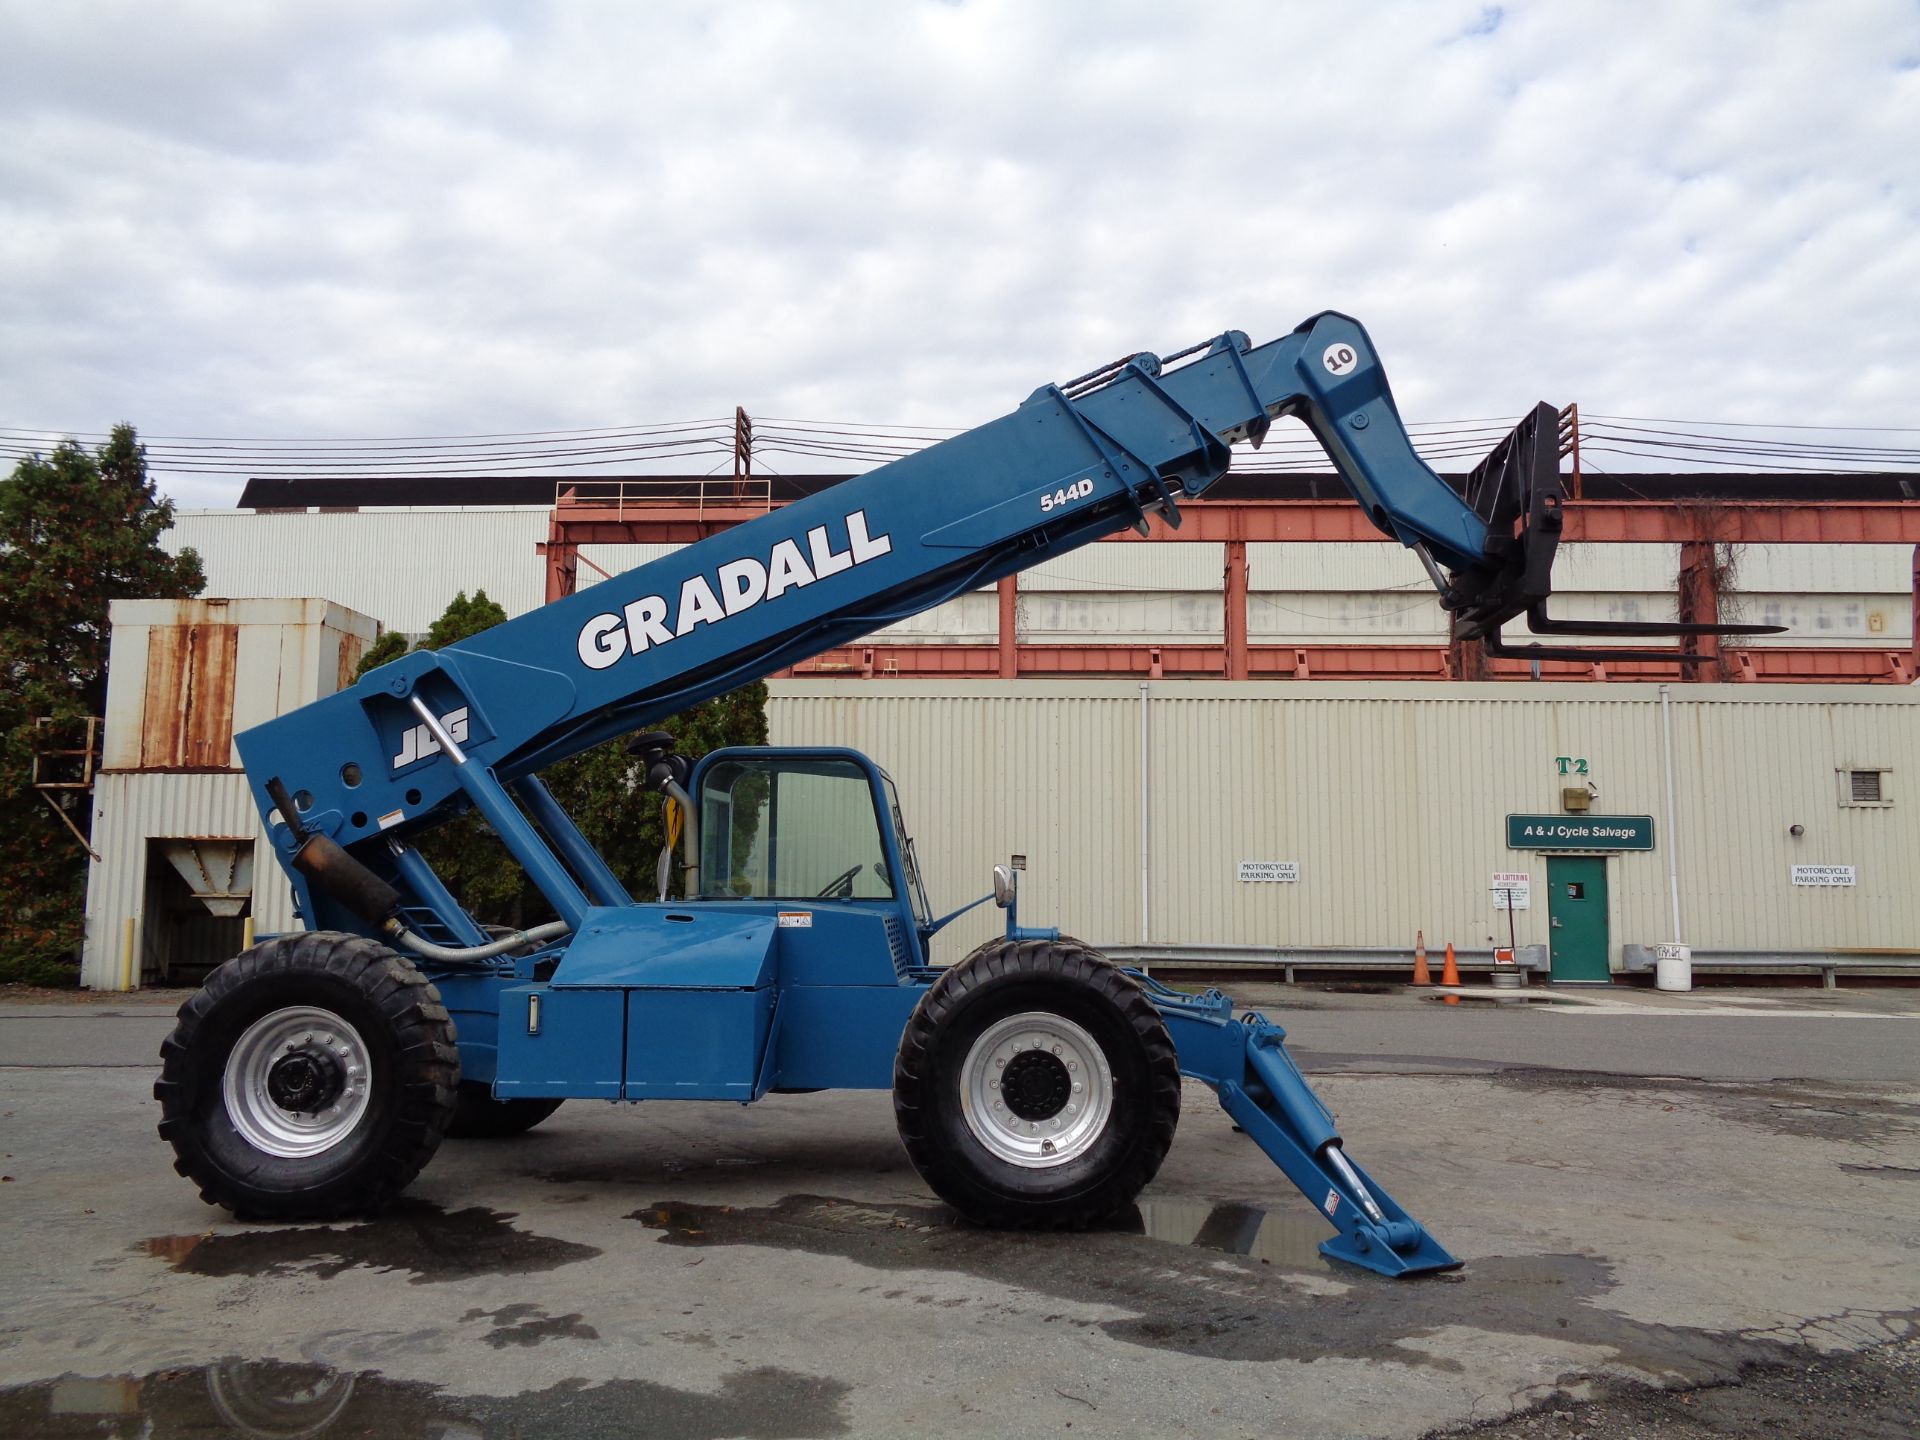 Gradall 544D-10 Telescopic Forklift -10,000 lbs - Image 22 of 29